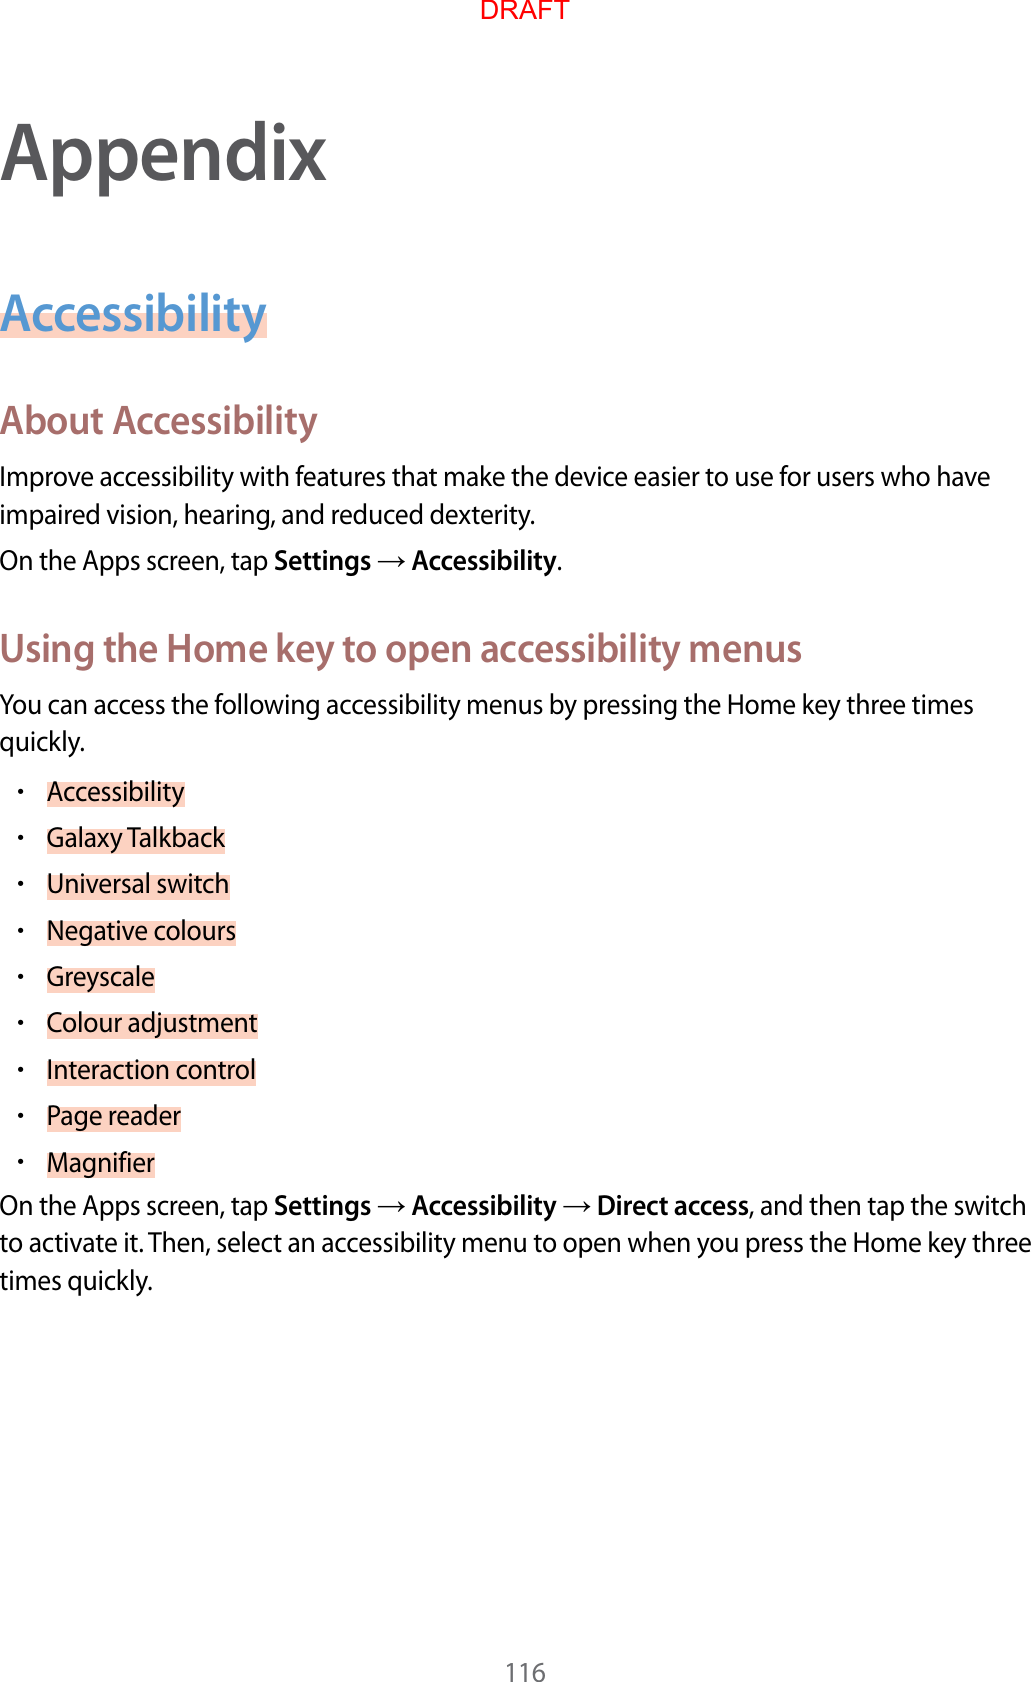 116AppendixAccessibilityAbout AccessibilityImprove accessibility with features that make the device easier to use for users who have impaired vision, hearing, and reduced dexterity.On the Apps screen, tap Settings  Accessibility.Using the Home key to open accessibility menusYou can access the following accessibility menus by pressing the Home key three times quickly.•Accessibility•Galaxy Talkback•Universal switch•Negative colours•Greyscale•Colour adjustment•Interaction control•Page reader•MagnifierOn the Apps screen, tap Settings  Accessibility  Direct access, and then tap the switch to activate it. Then, select an accessibility menu to open when you press the Home key three times quickly.DRAFT